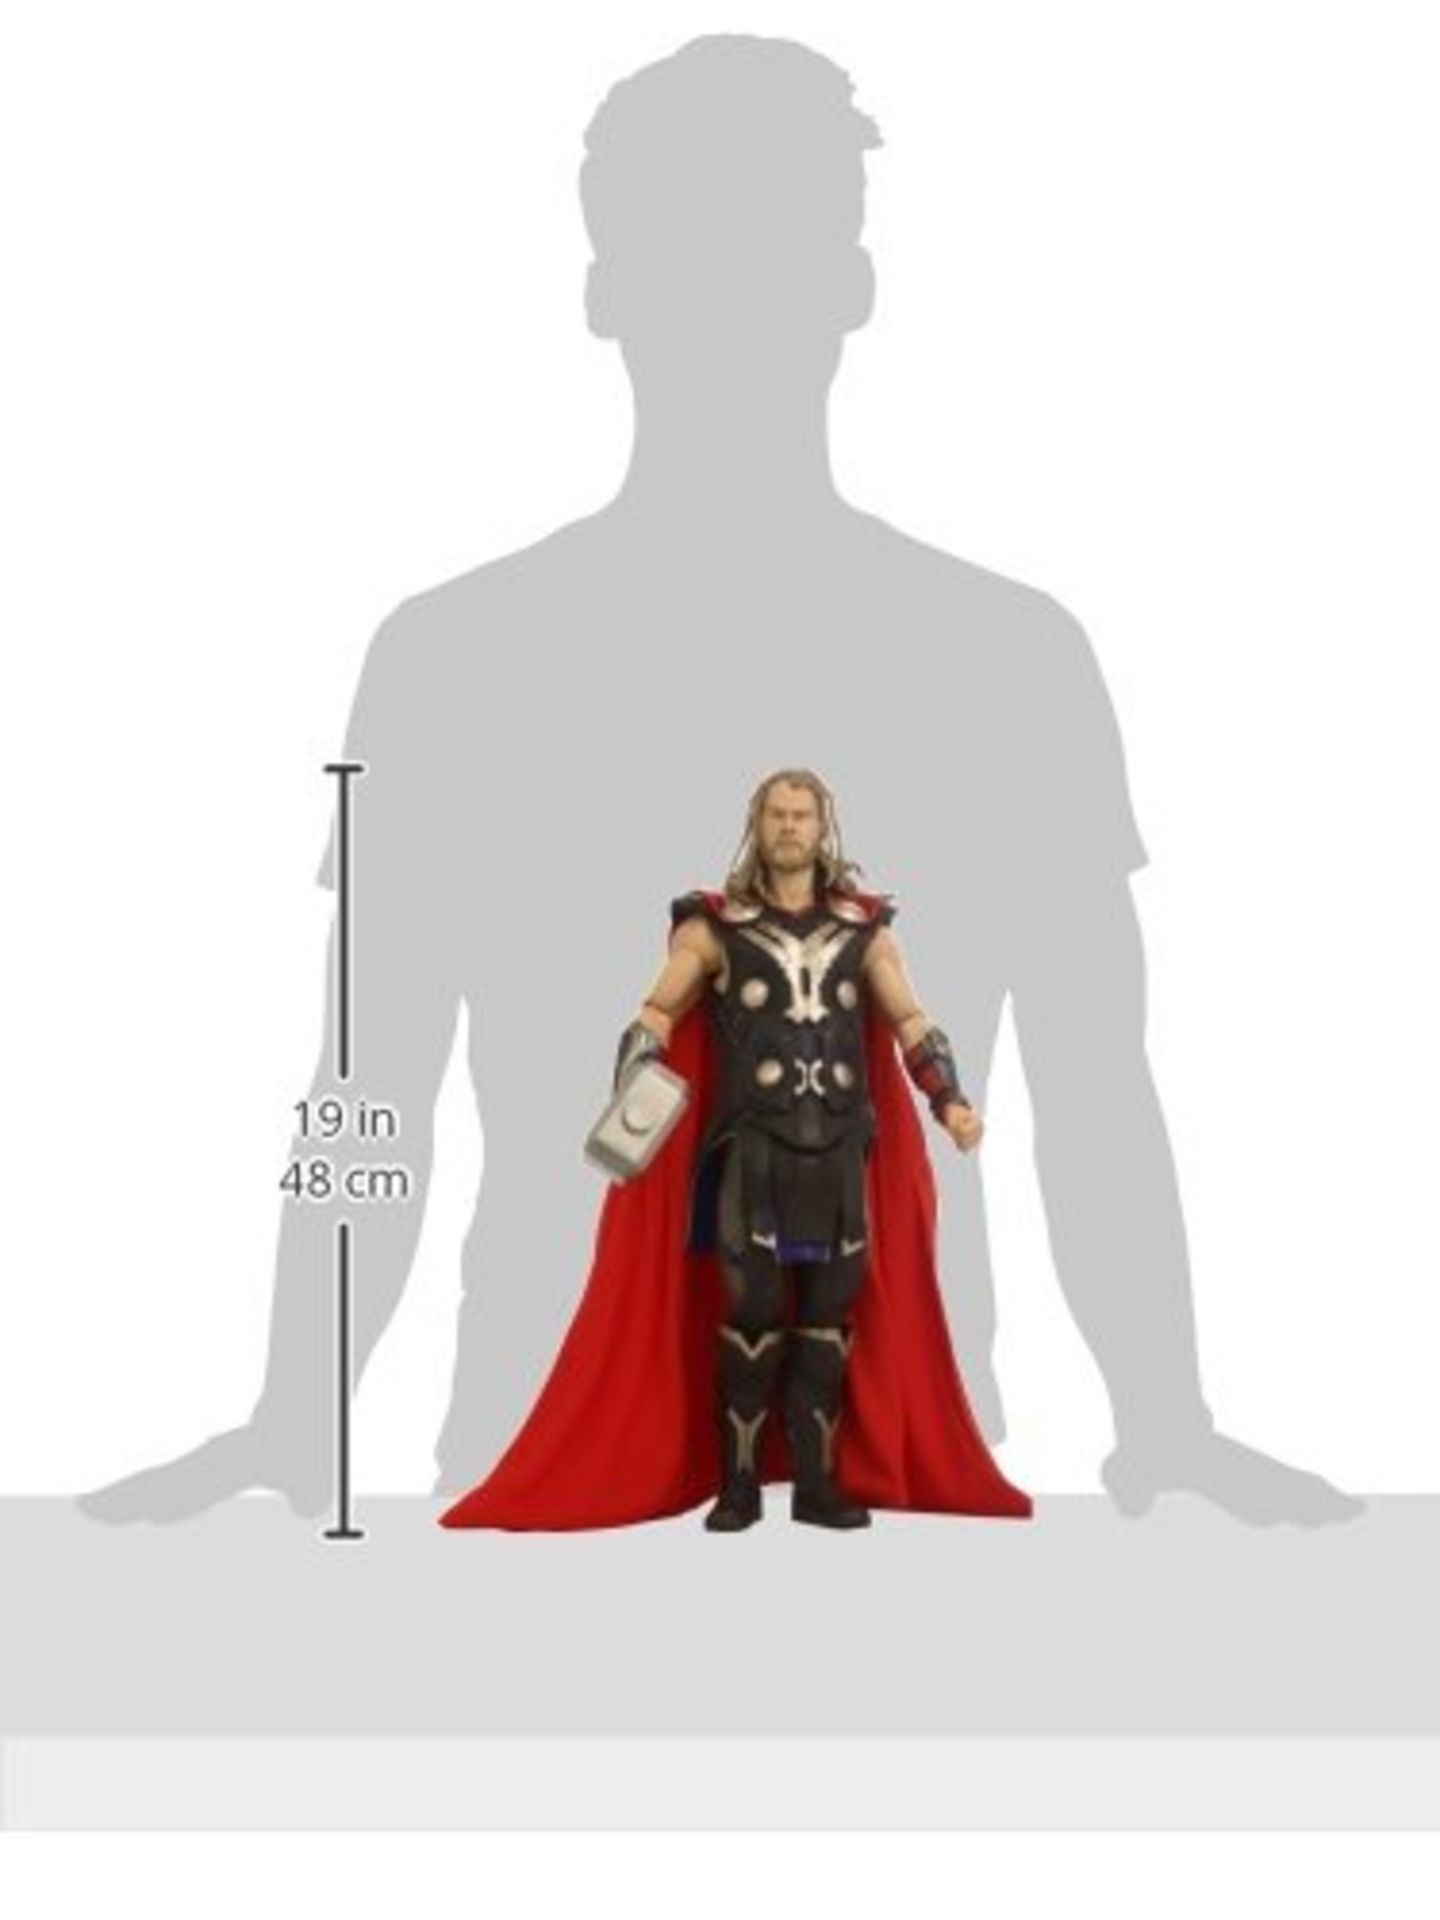 2 x Marvel 61236 1:4 Scale "Avengers Thor" Action Figure | 634482612361 | RRP £ 150.54 - Image 3 of 3